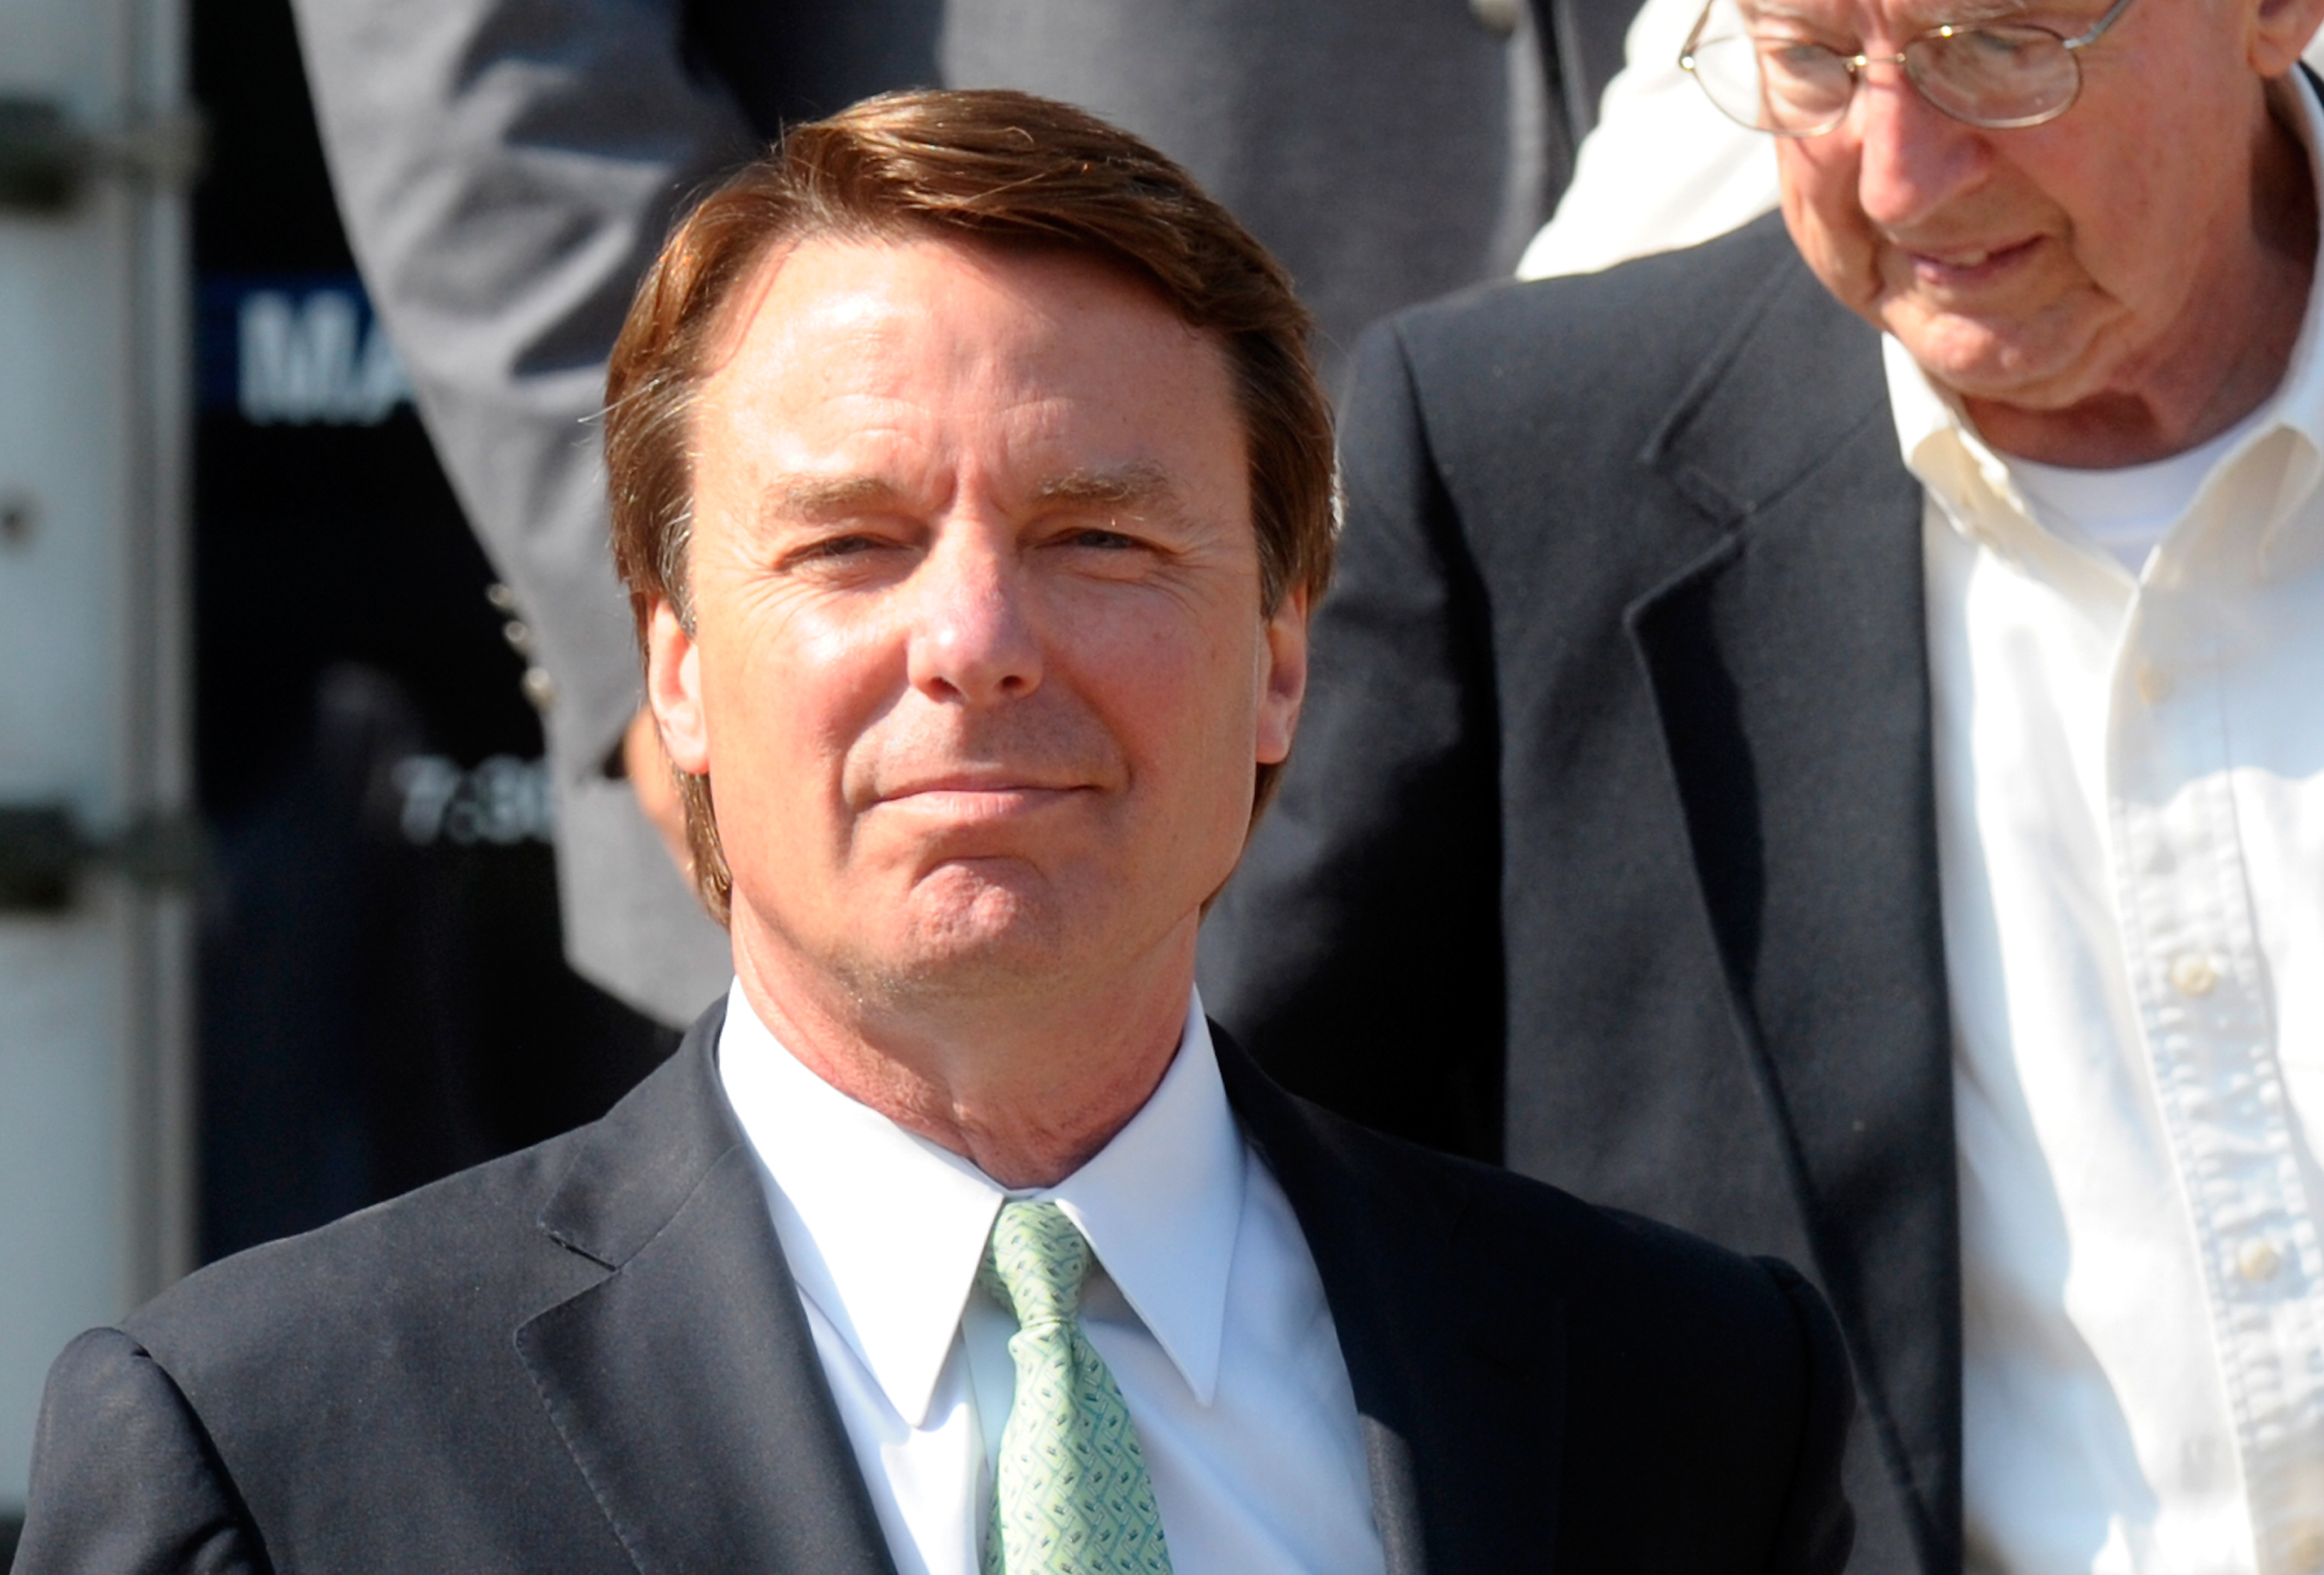 Whatever Happened To John Edwards? The North Carolina Senators Fall From Grace Was Quick and Absolute